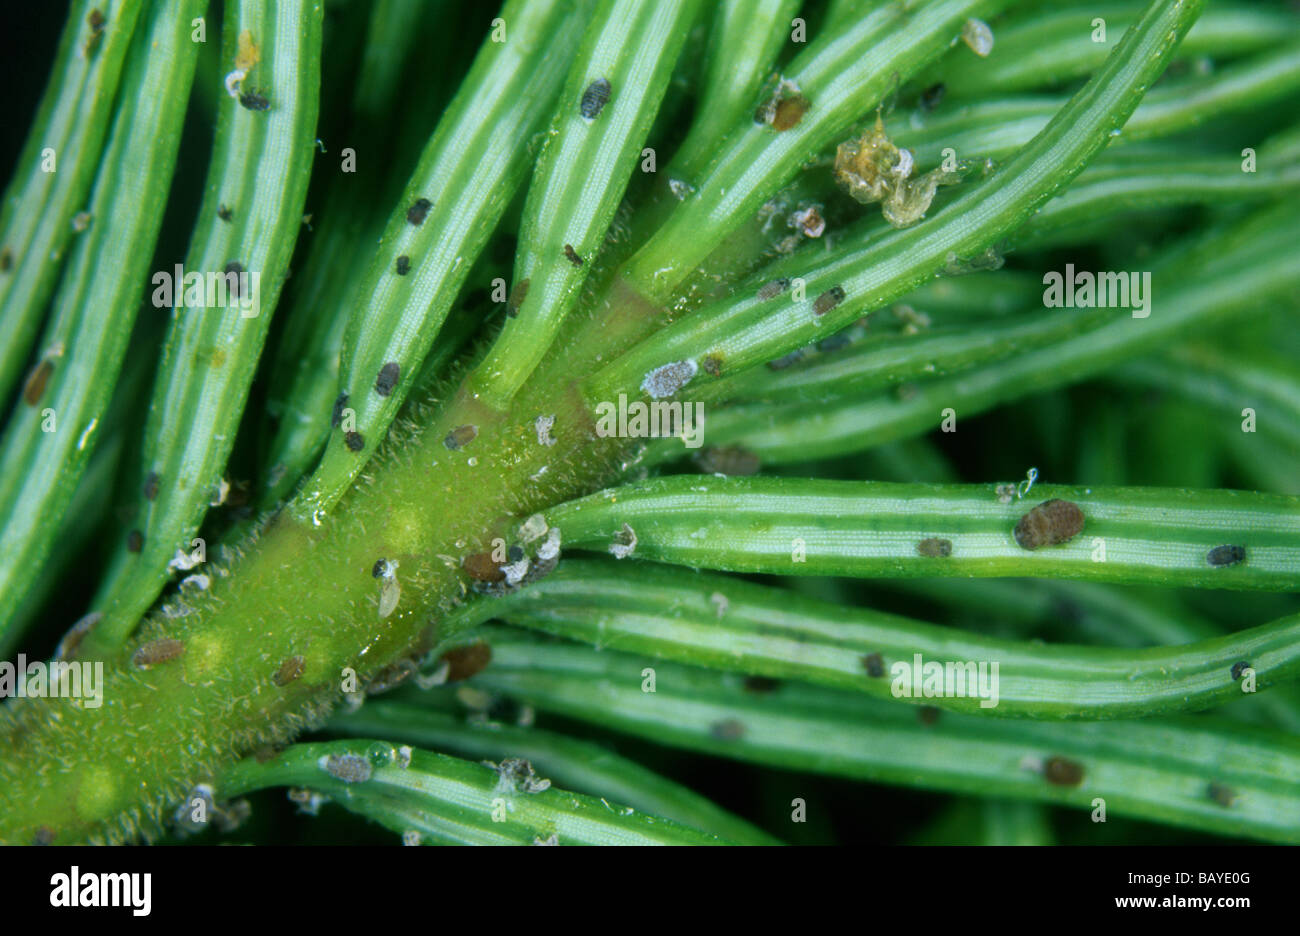 Douglas fir adelges Adelges cooleyi young nymphs immatures on conifer needles Stock Photo